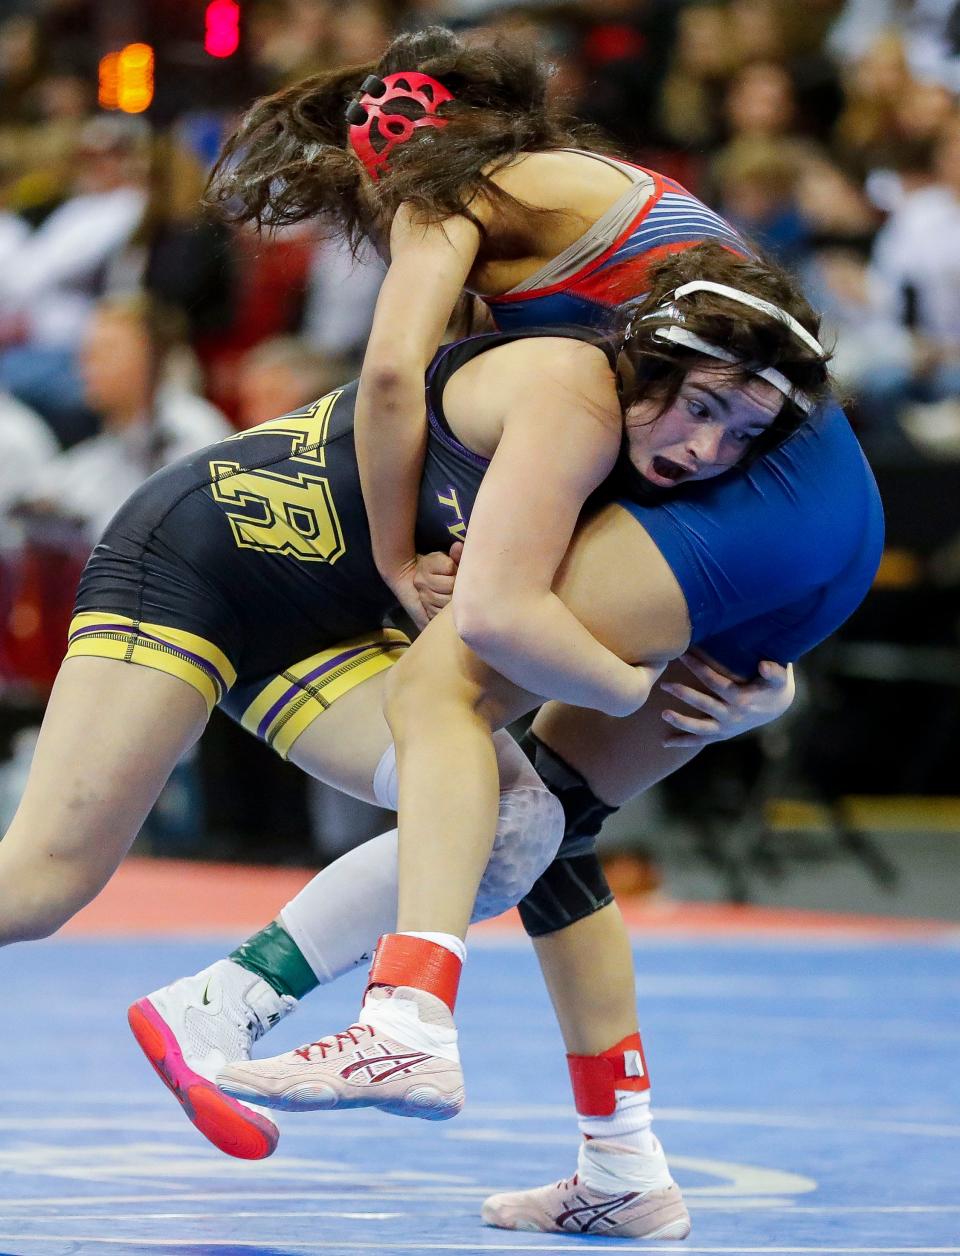 The youngest of the six Bianchi children and the only girl, Angie Bianchi is hoping to add a ninth state title to her families legacy with Two Rivers wrestling. Her mother, Neysa Bianchi, is her coach.